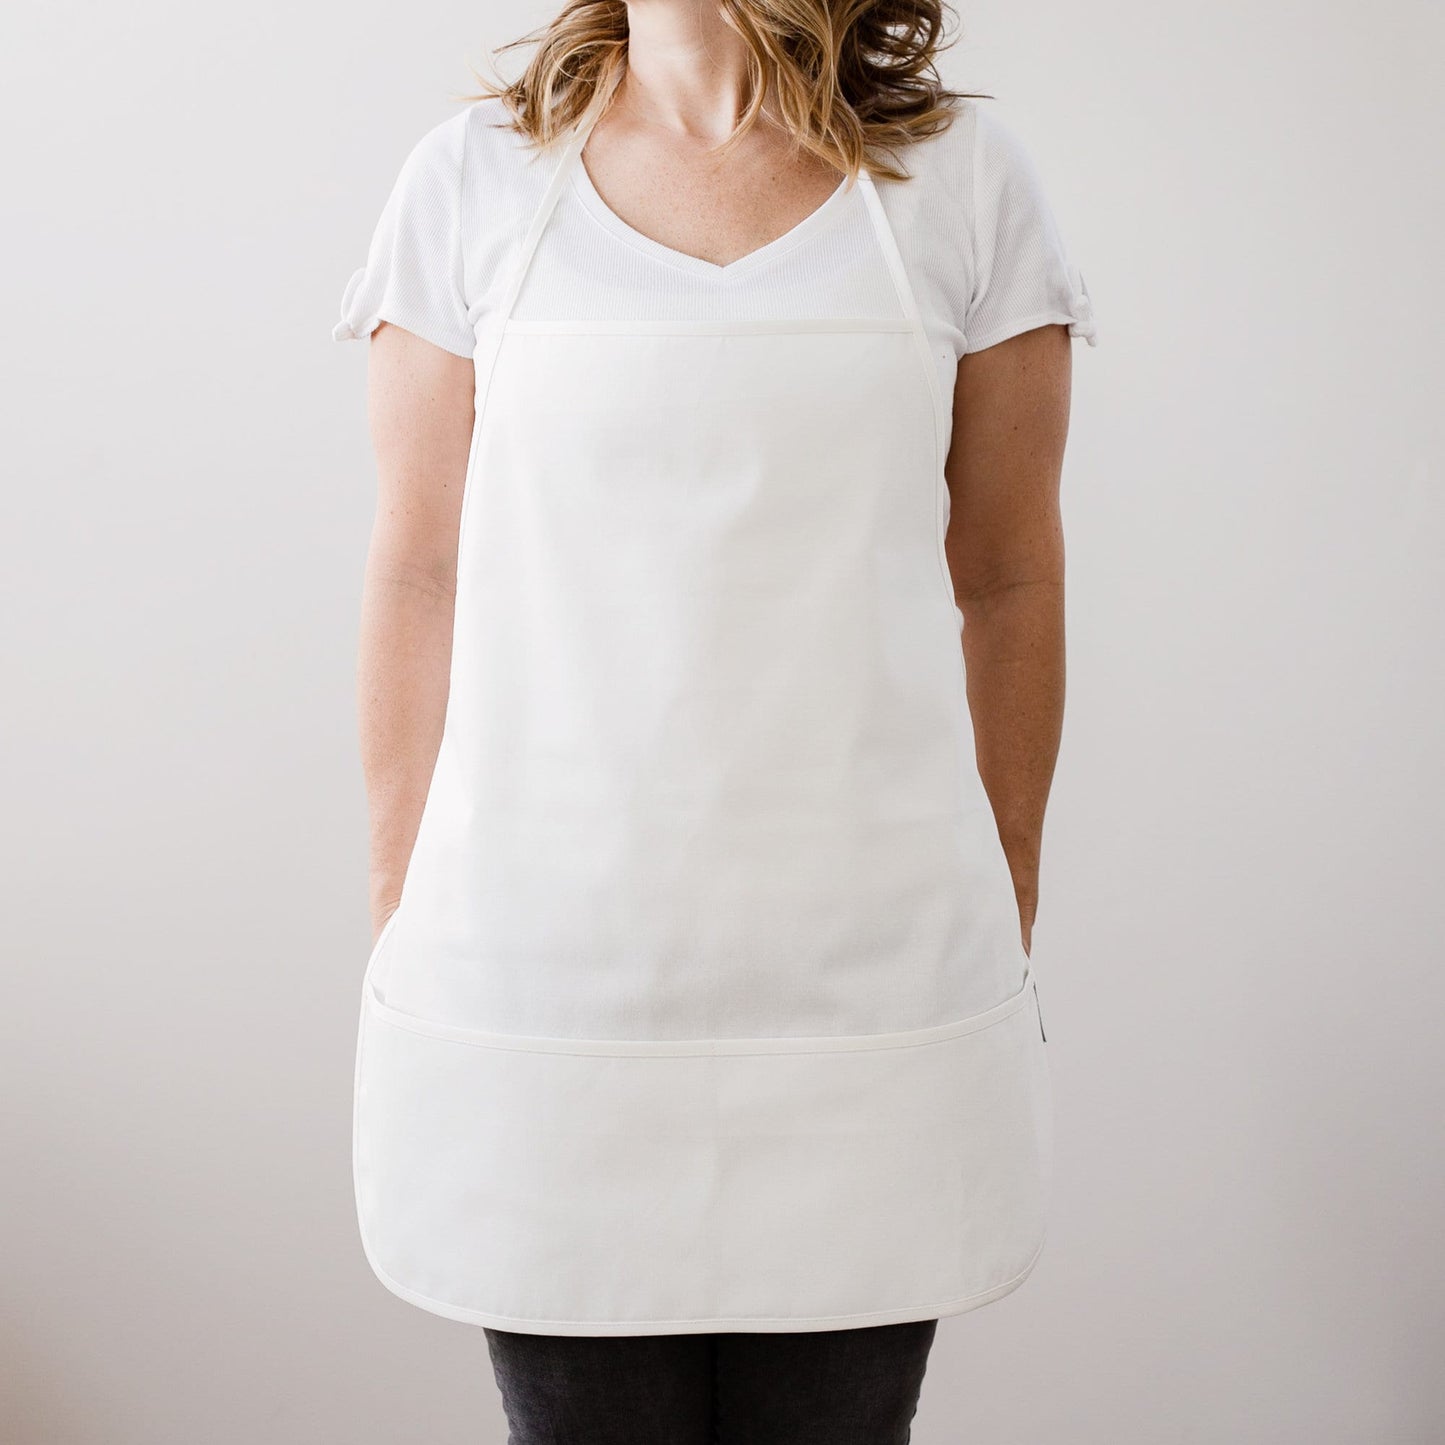 Load image into Gallery viewer, Pocket Apron | Kitchen Apron | Apron | Full Kitchen Apron | Custom Apron | Vintage Apron | Cotton Canvas Full Apron | Apron With Pockets
